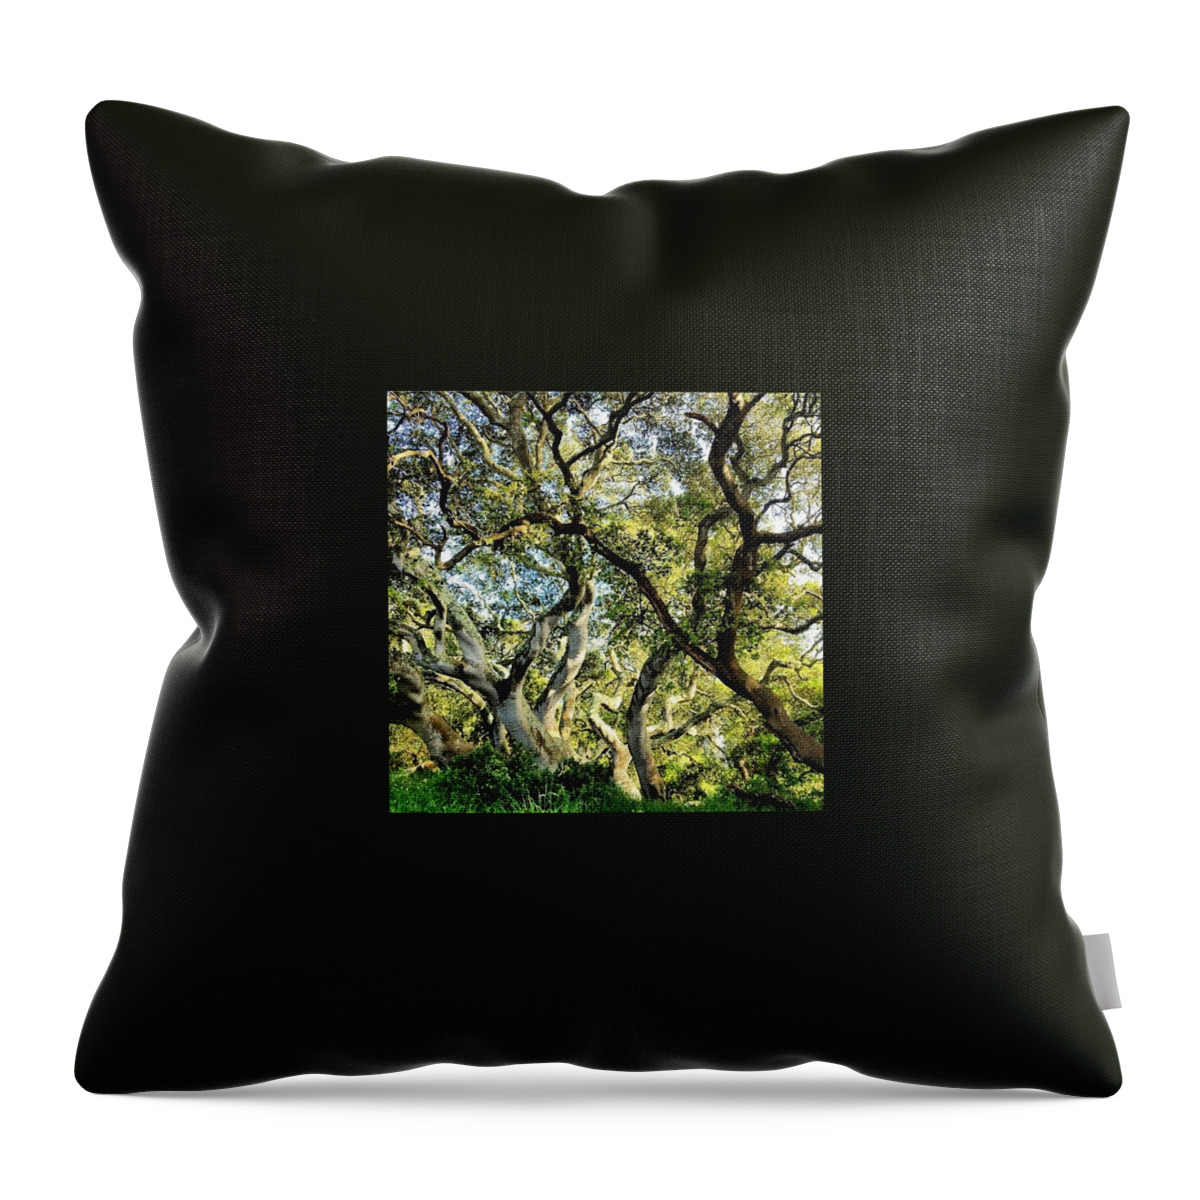 Golden Gate Park Throw Pillow featuring the photograph Twisted Foliage by Courtney Ross